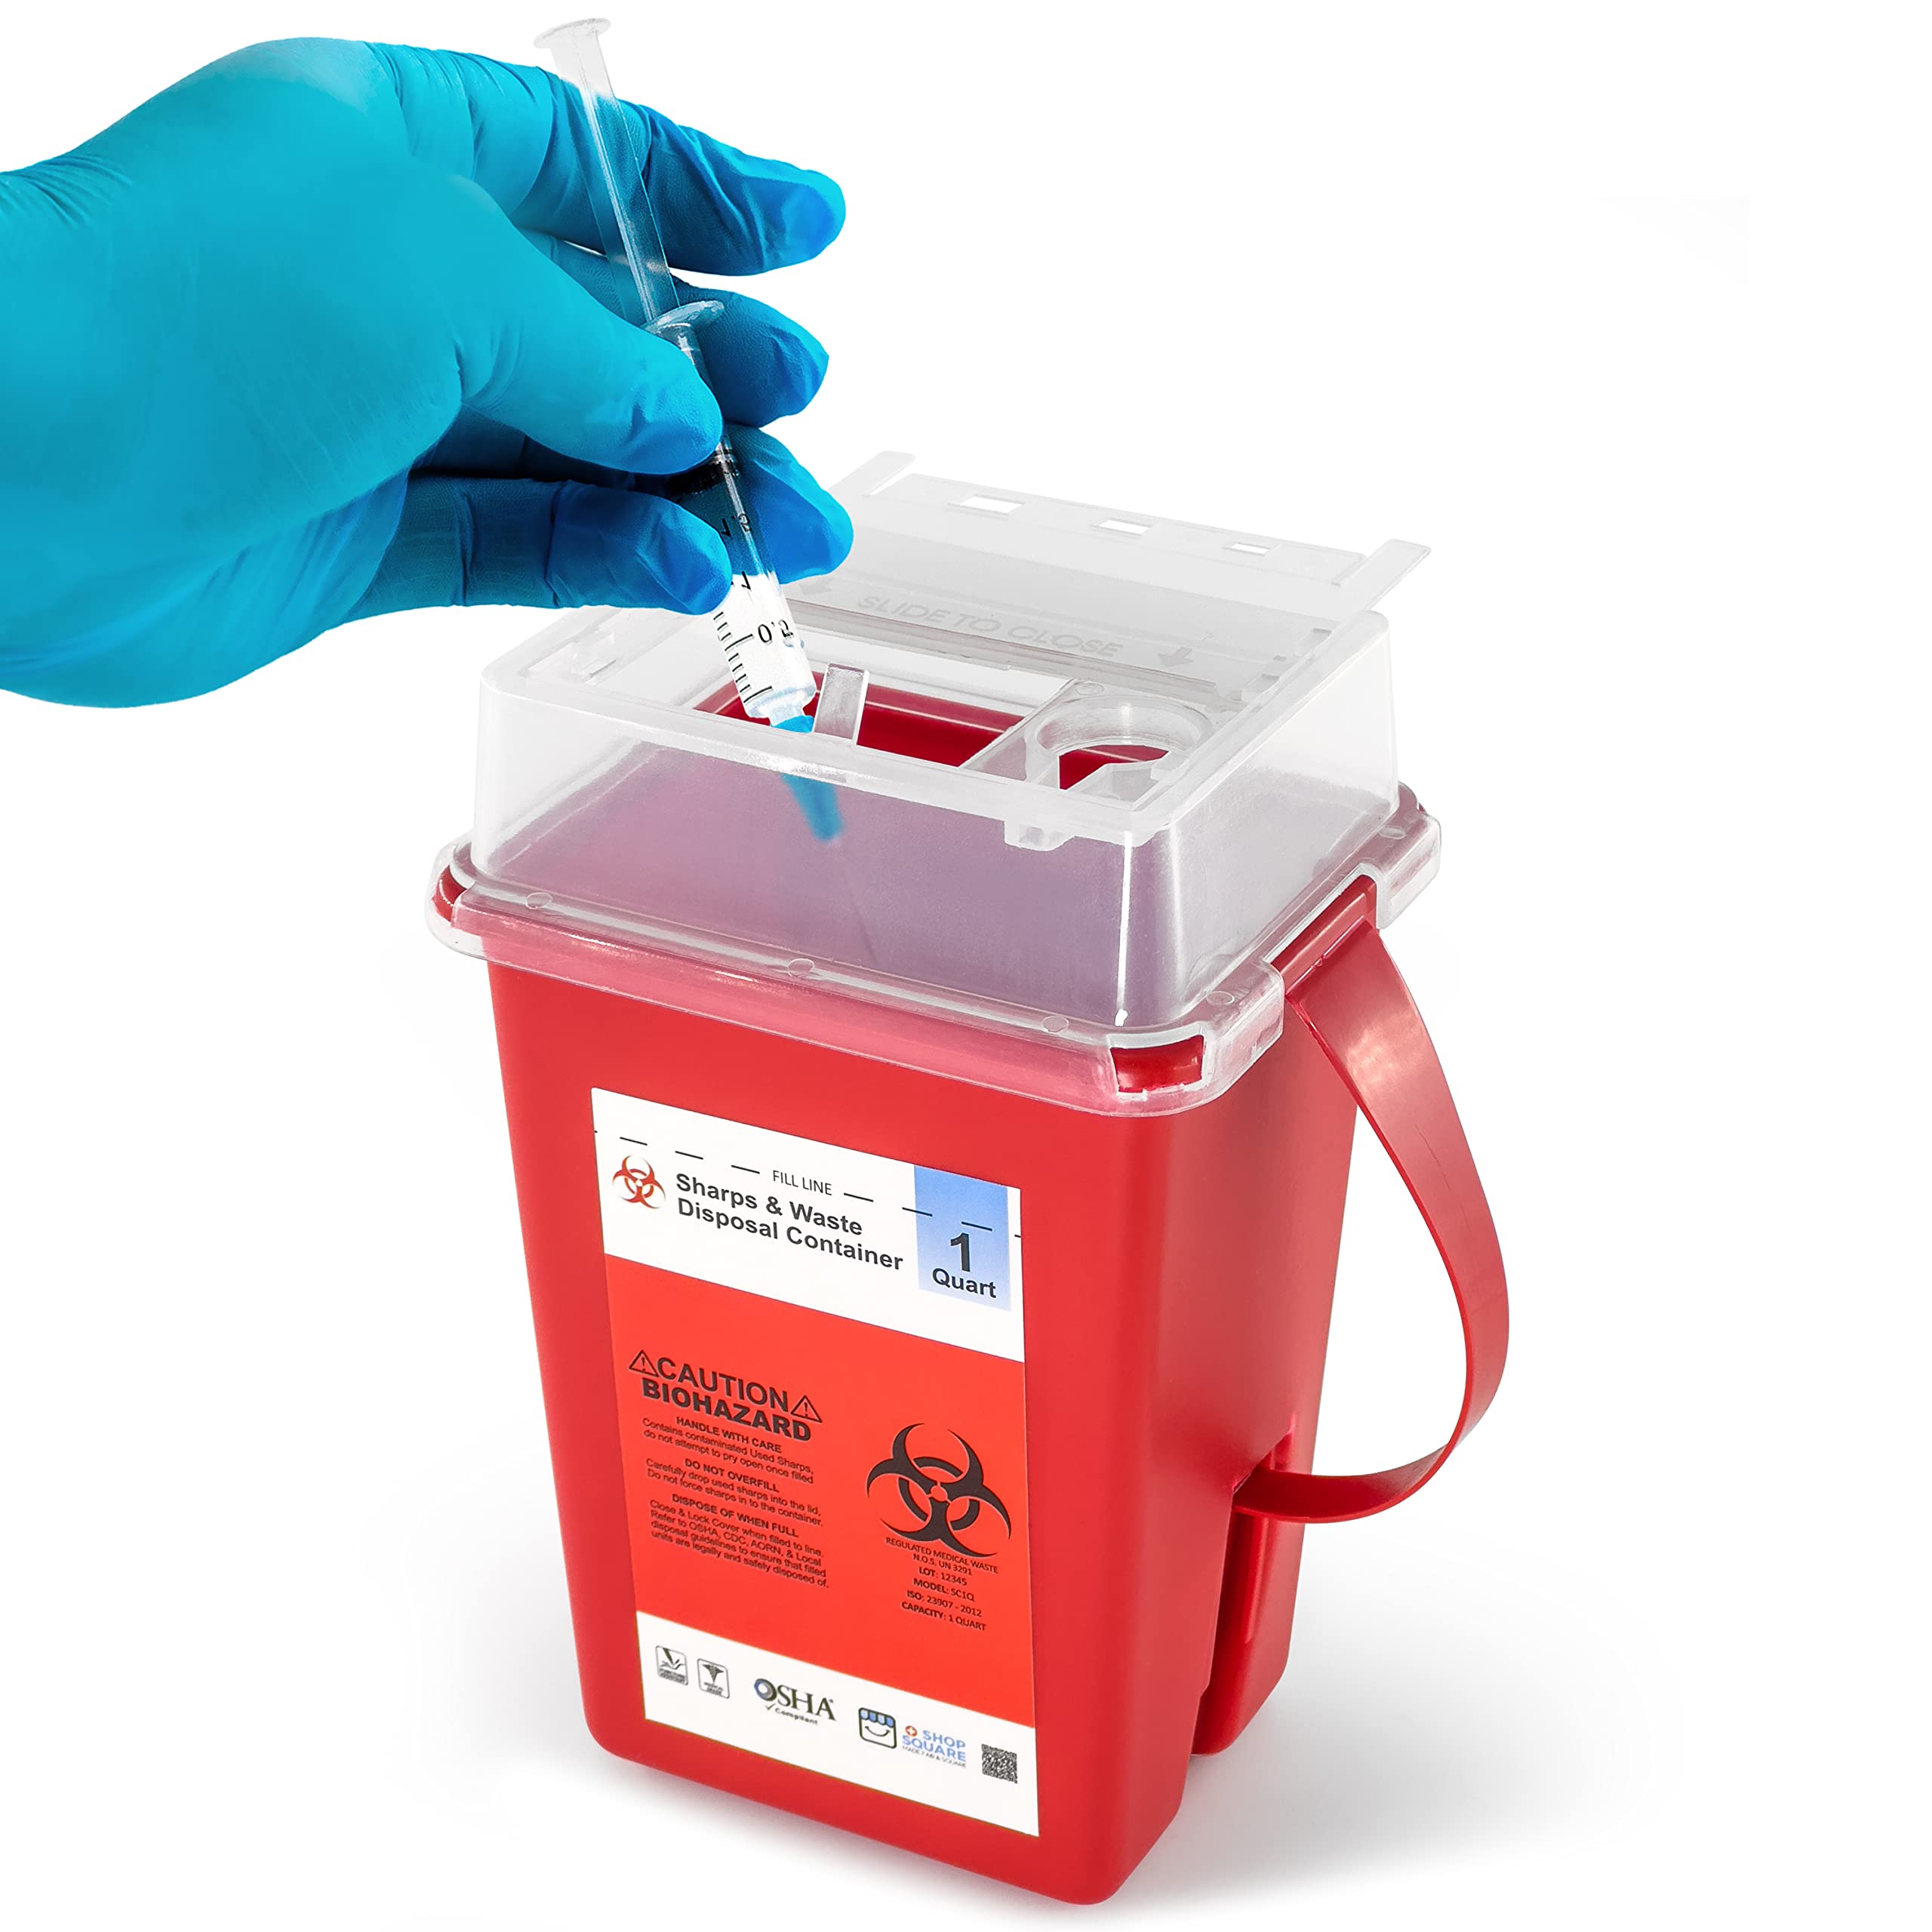 Sharps Container, Sharps Containers for Home Use, Needle Disposal ...